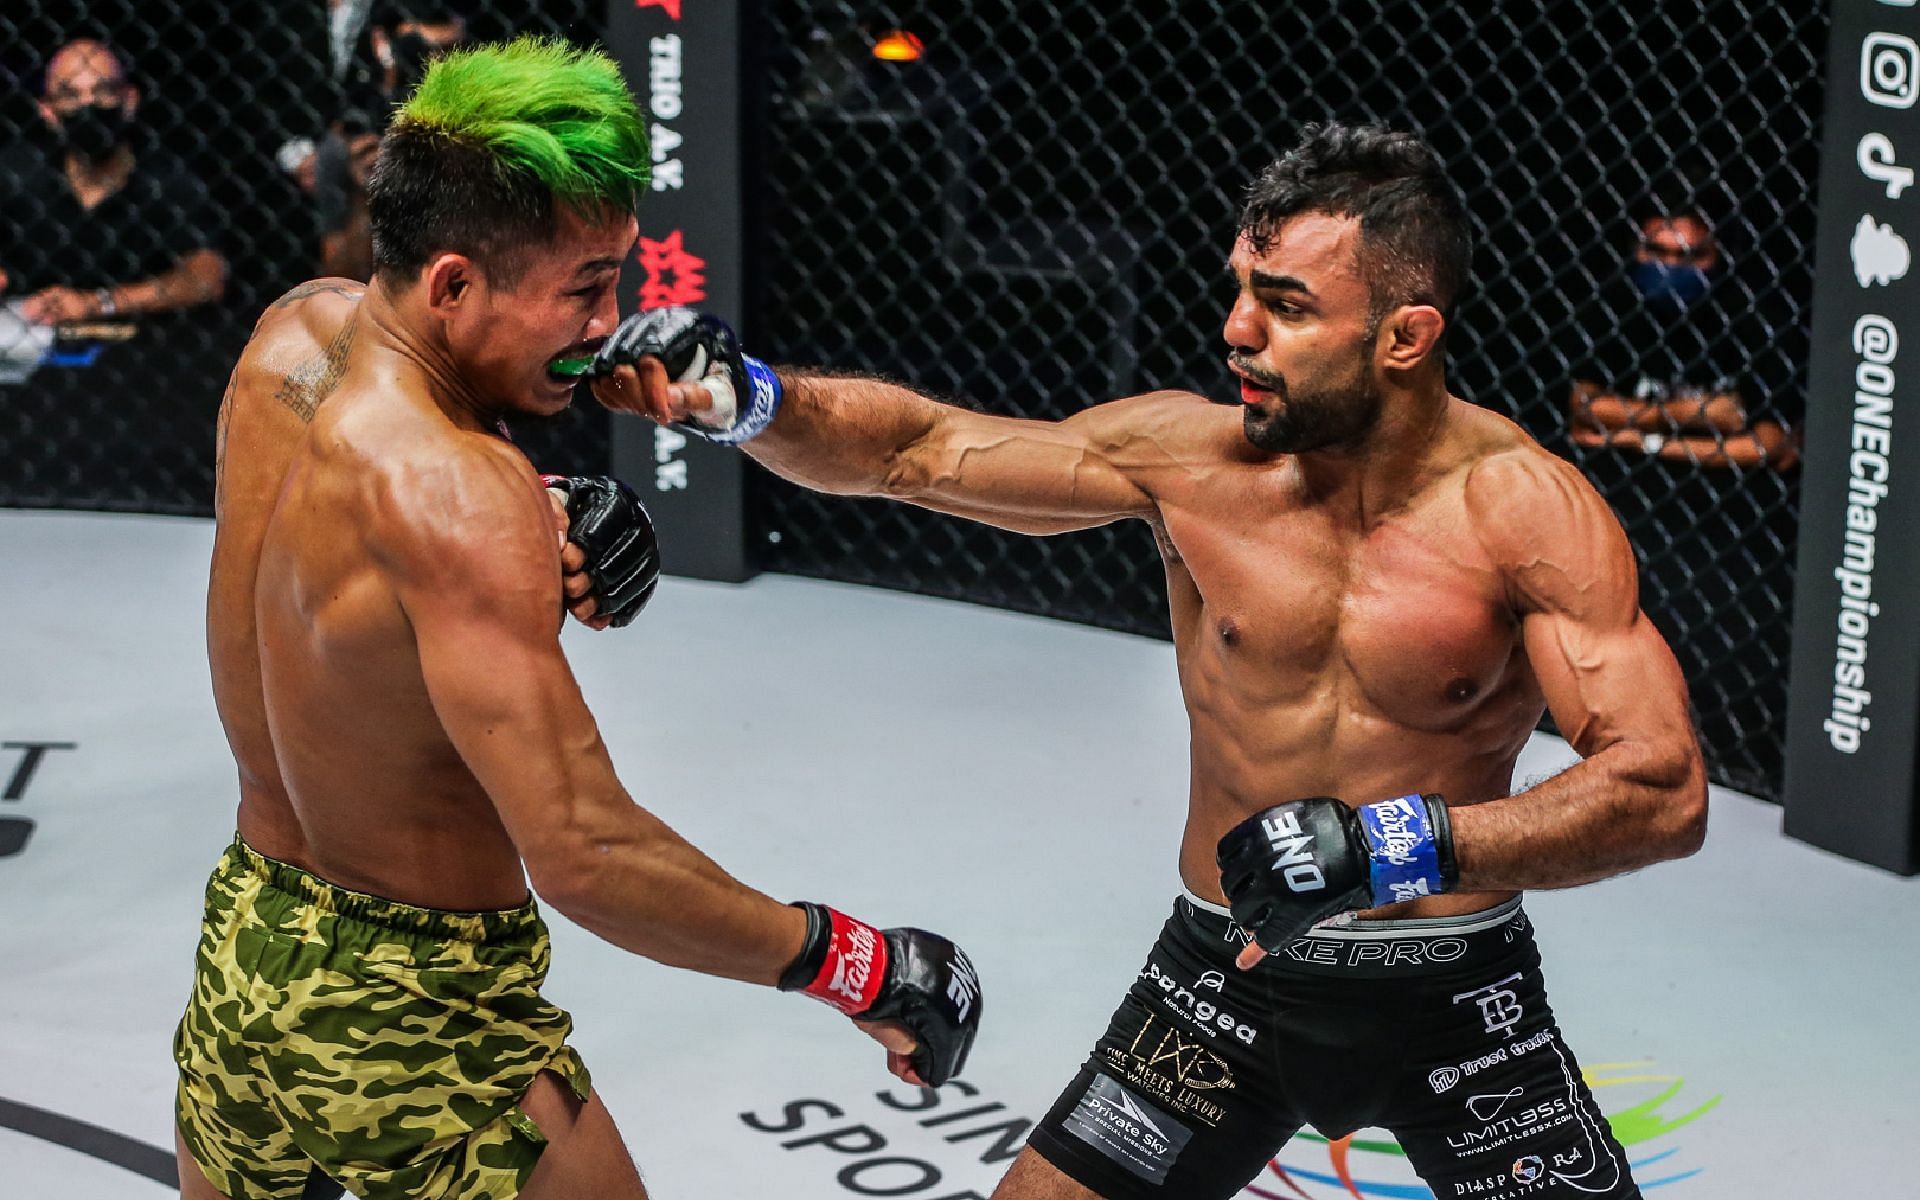 Gurdarshan Mangat (right) lands a right hook to the face of Yodkaikaew Fairtex (left) in their ONE 158 match. [Photo ONE Championship]